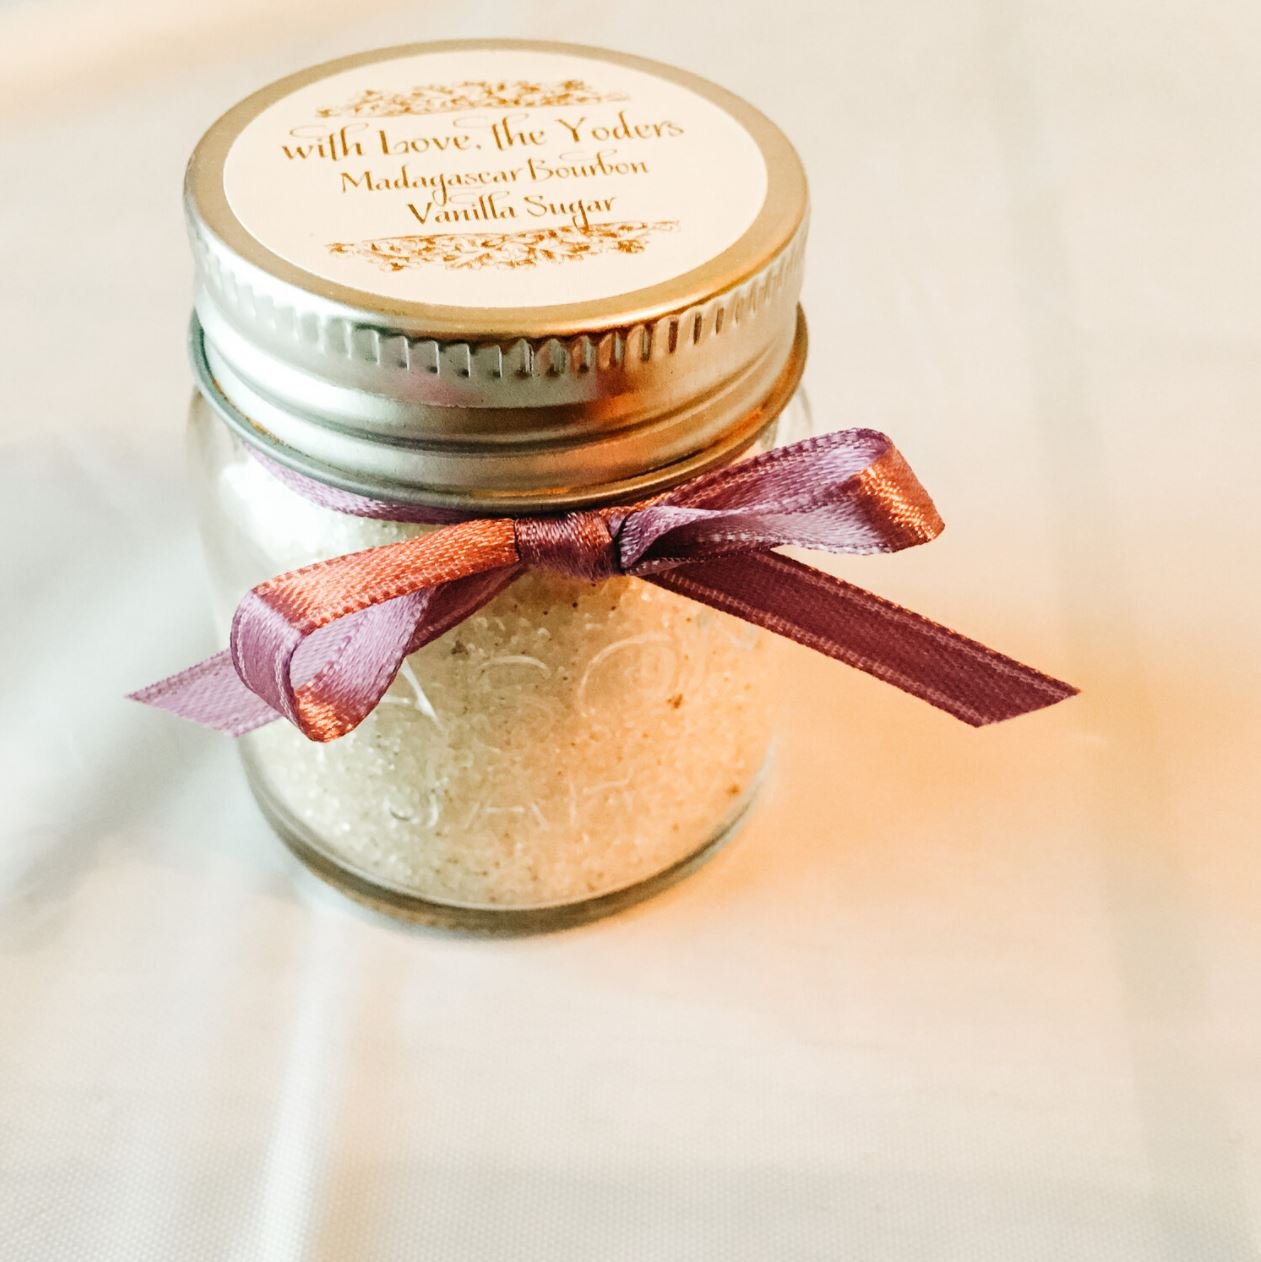 mason jar containing flavored sugar with a marron ribbon and a label that reads "with Love, the Yoders. Madagascar Burbon Vanilla Sugar"